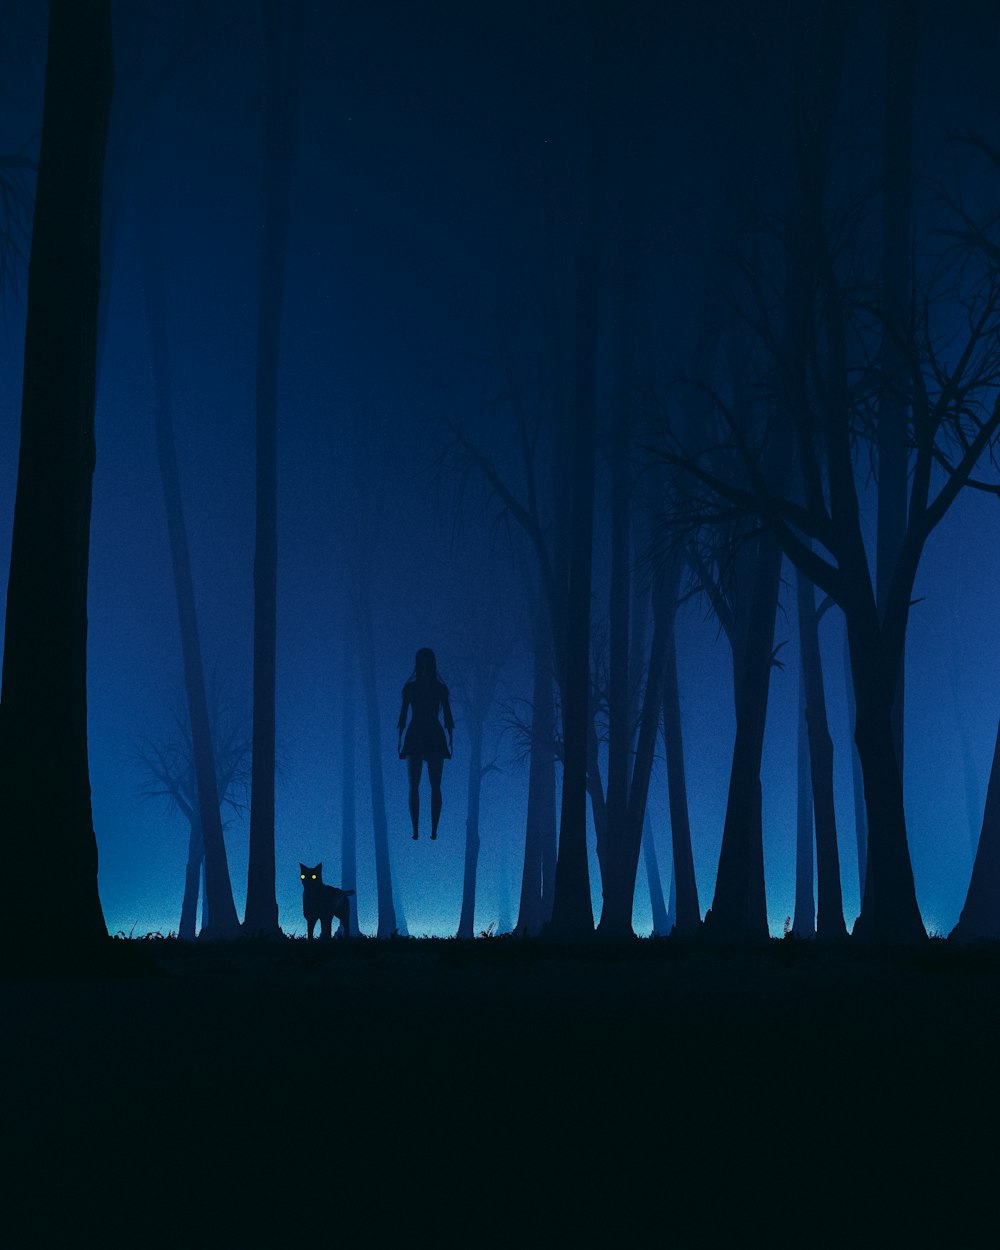 a person and a dog walking in the woods